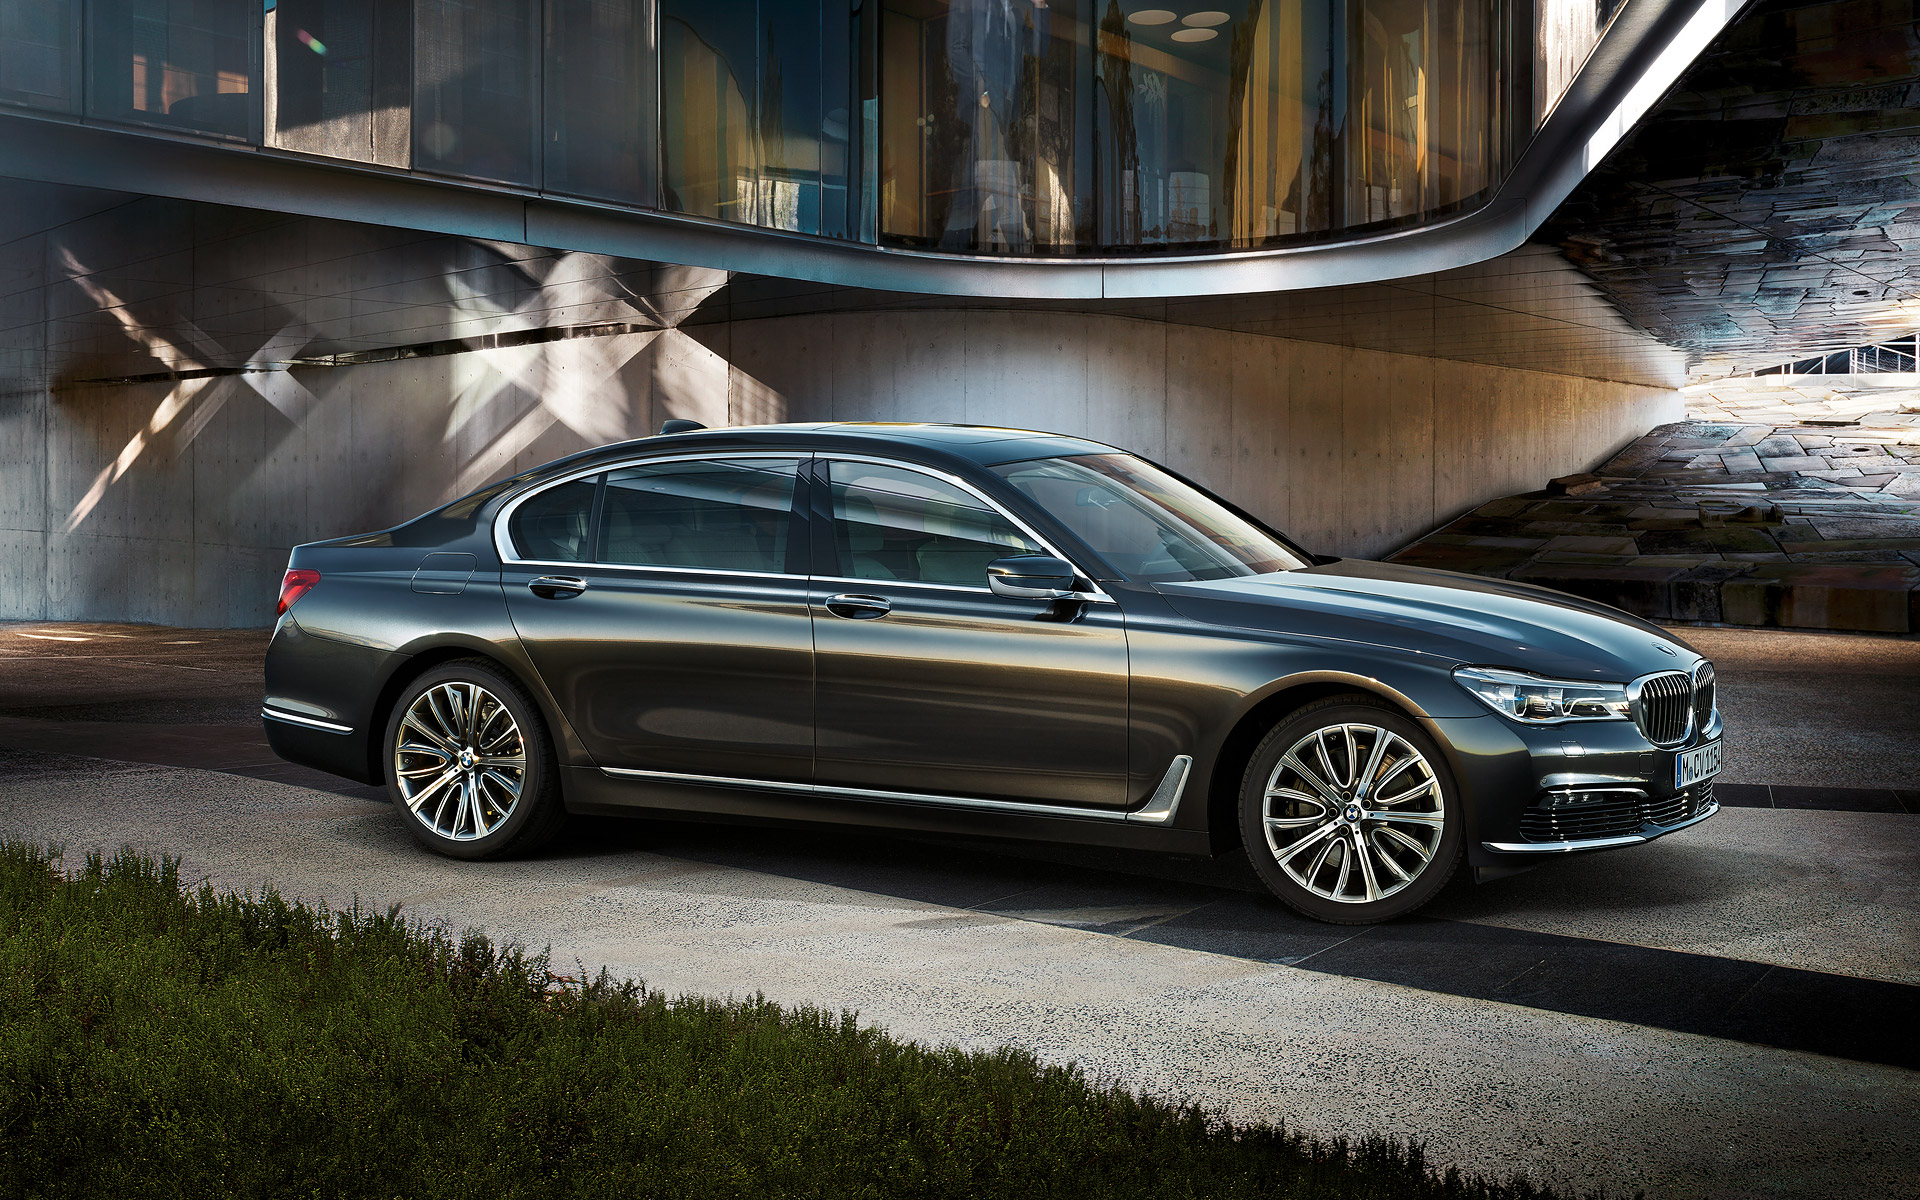 Bmw 7 Series Wallpapers